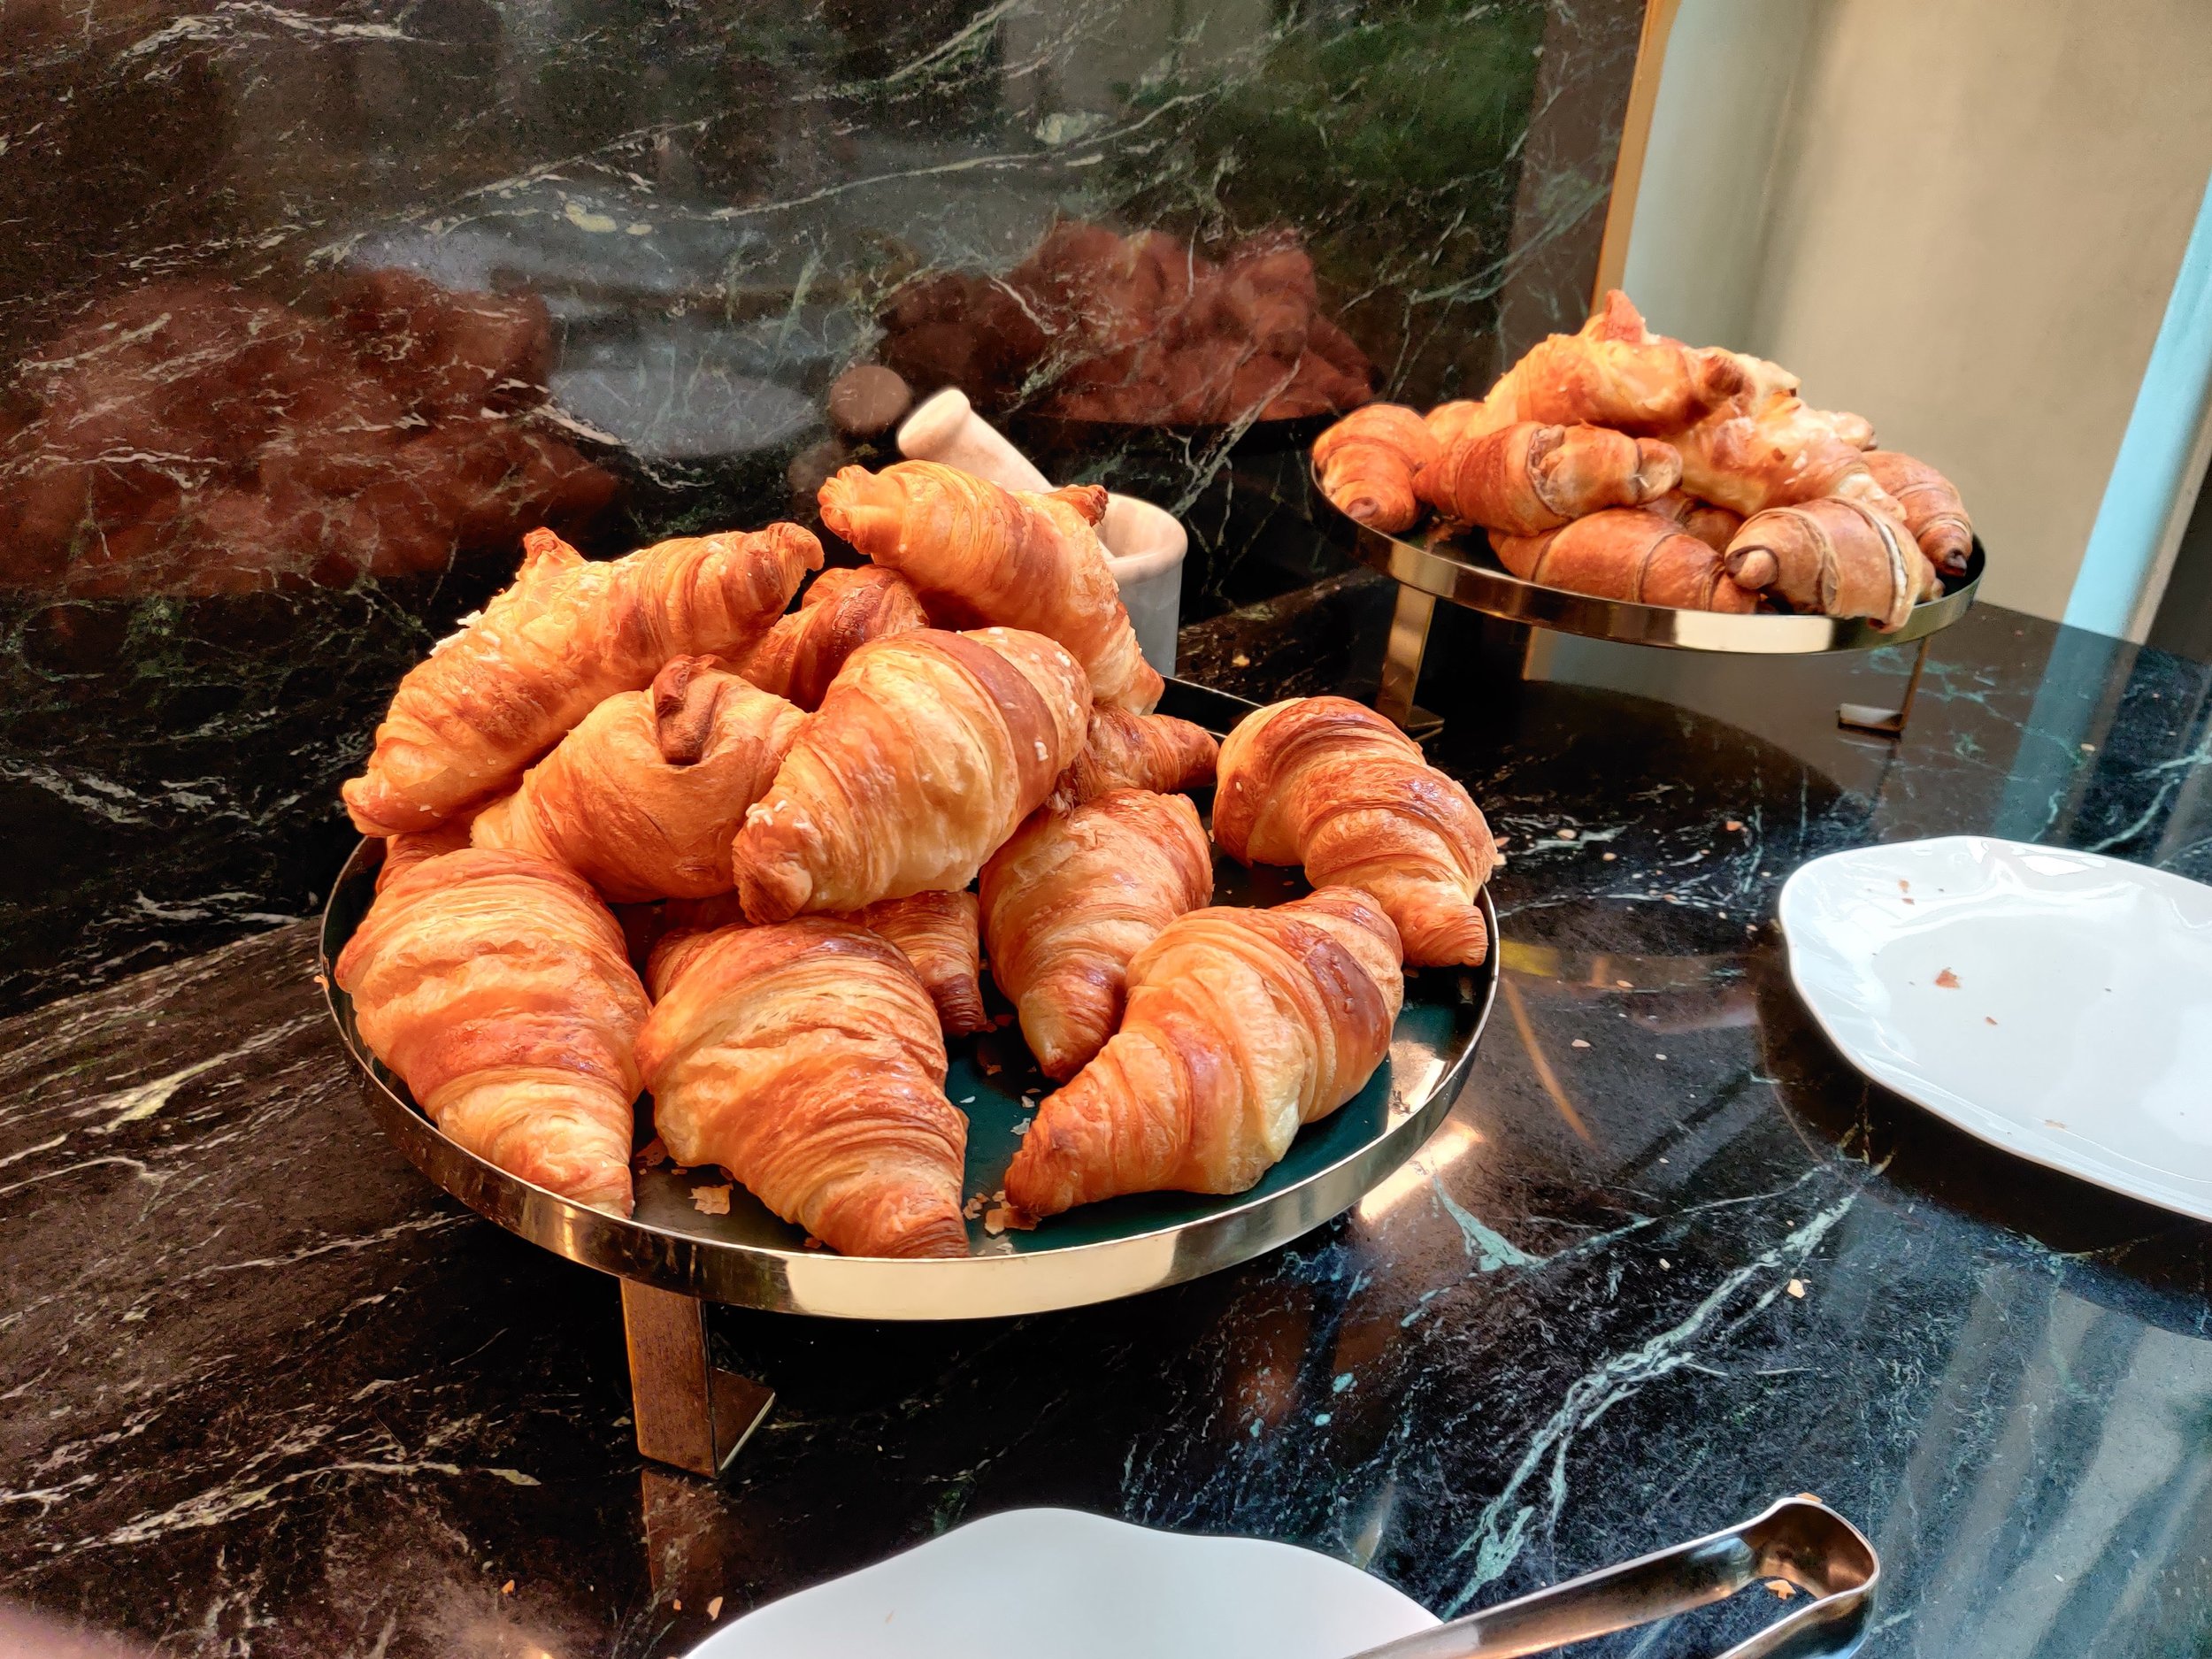 Grand Hotel Minerva Florence Review breakfast